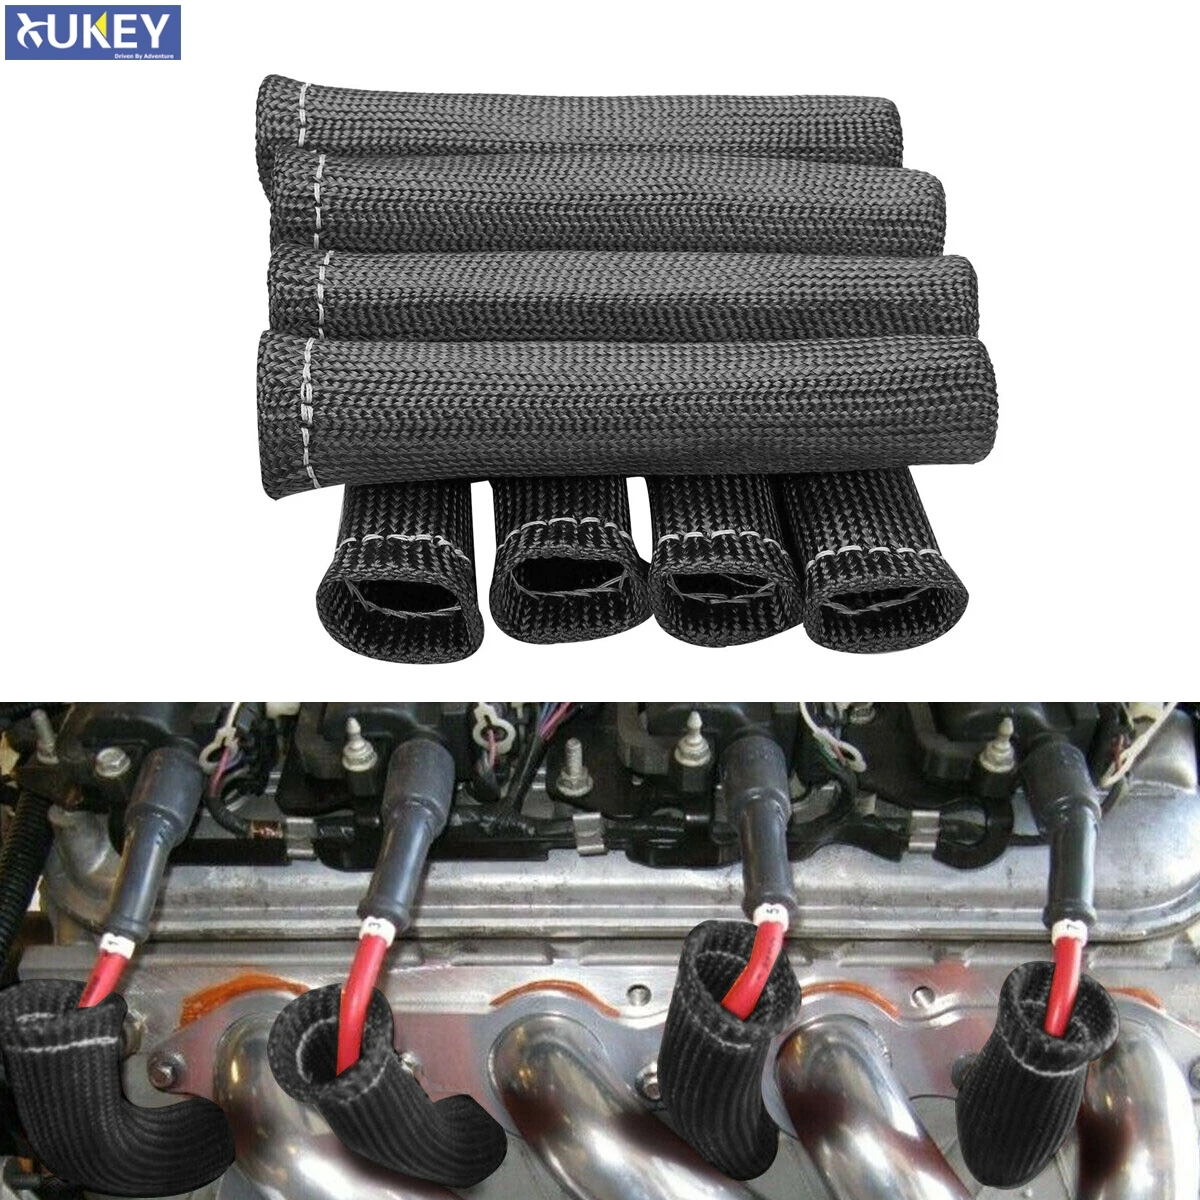 6 inch, 8 Pieces, Black SUNDELY Car Spark Plug Wire Boot Thermal Heat Shield Protector Cover Sleeve Insulator Glassfiber 